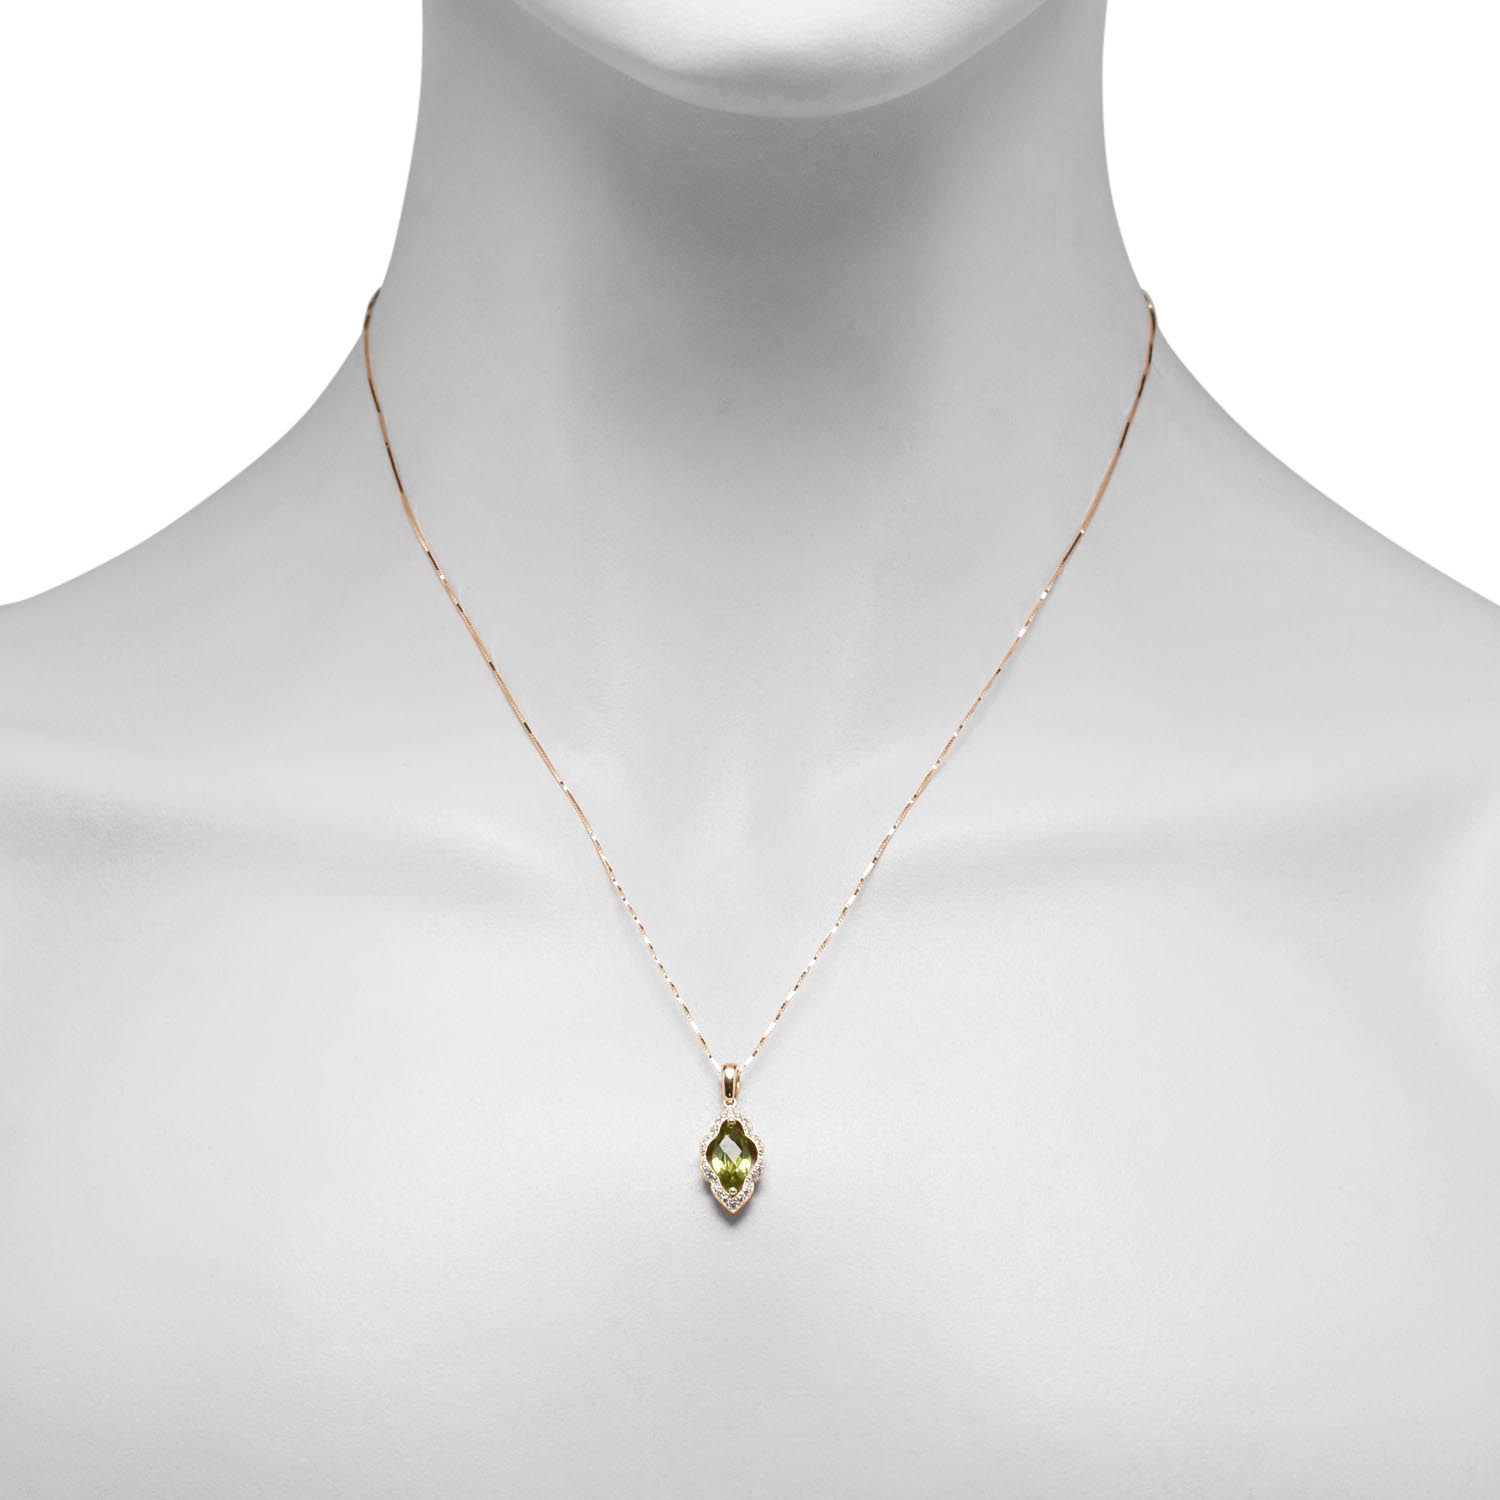 Peridot Necklace in 14kt Yellow Gold with Diamonds (1/10ct tw)